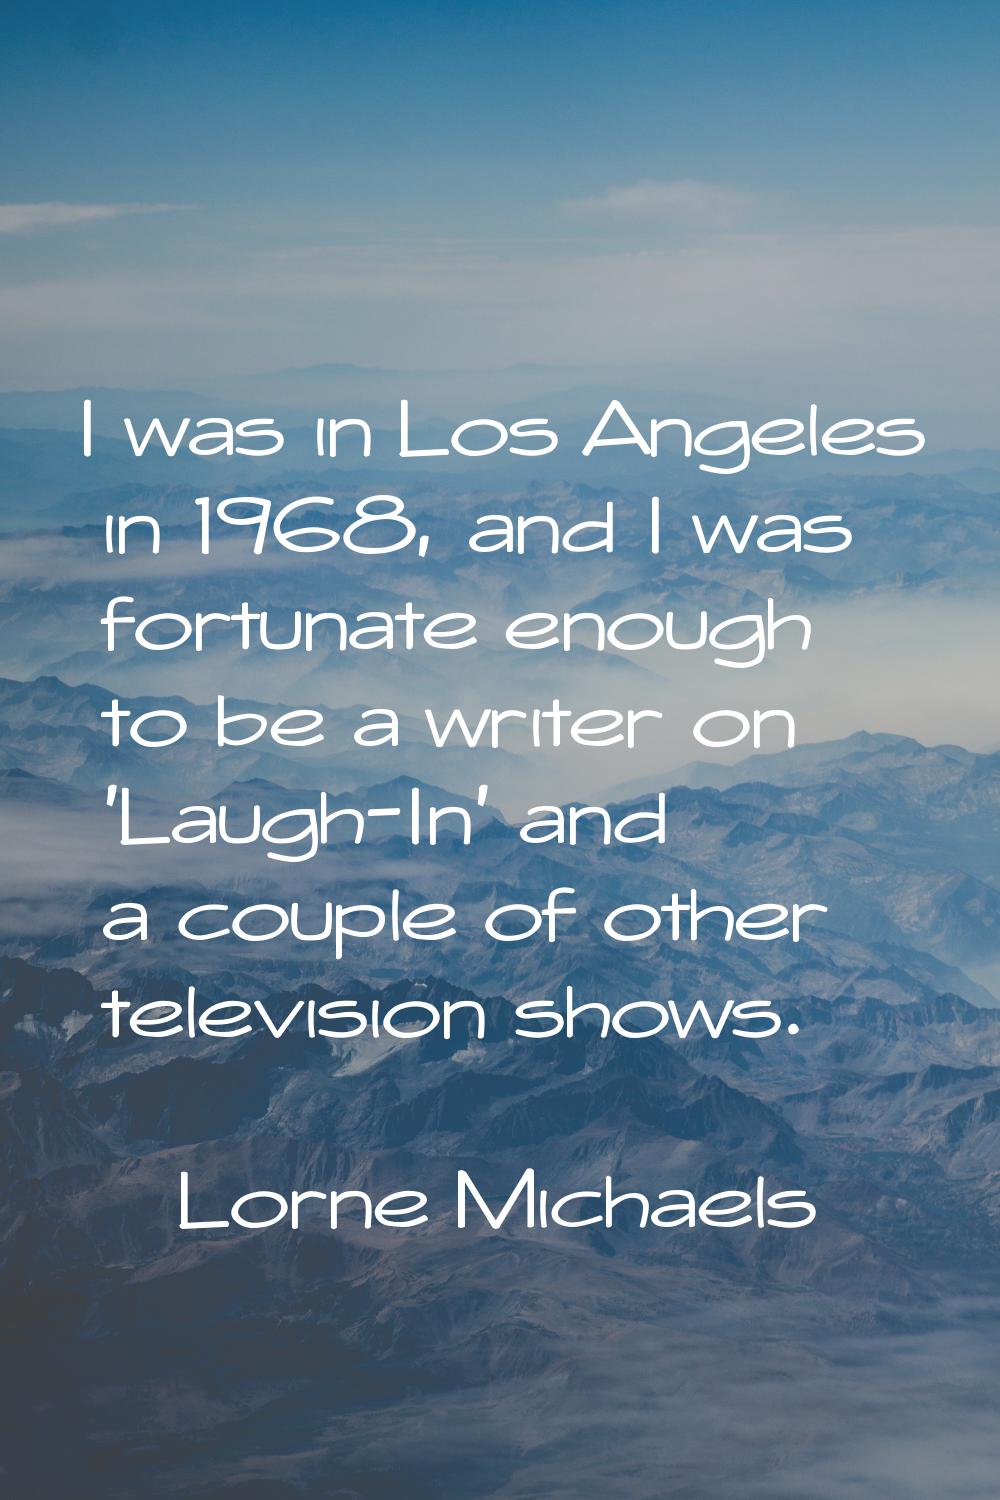 I was in Los Angeles in 1968, and I was fortunate enough to be a writer on 'Laugh-In' and a couple 